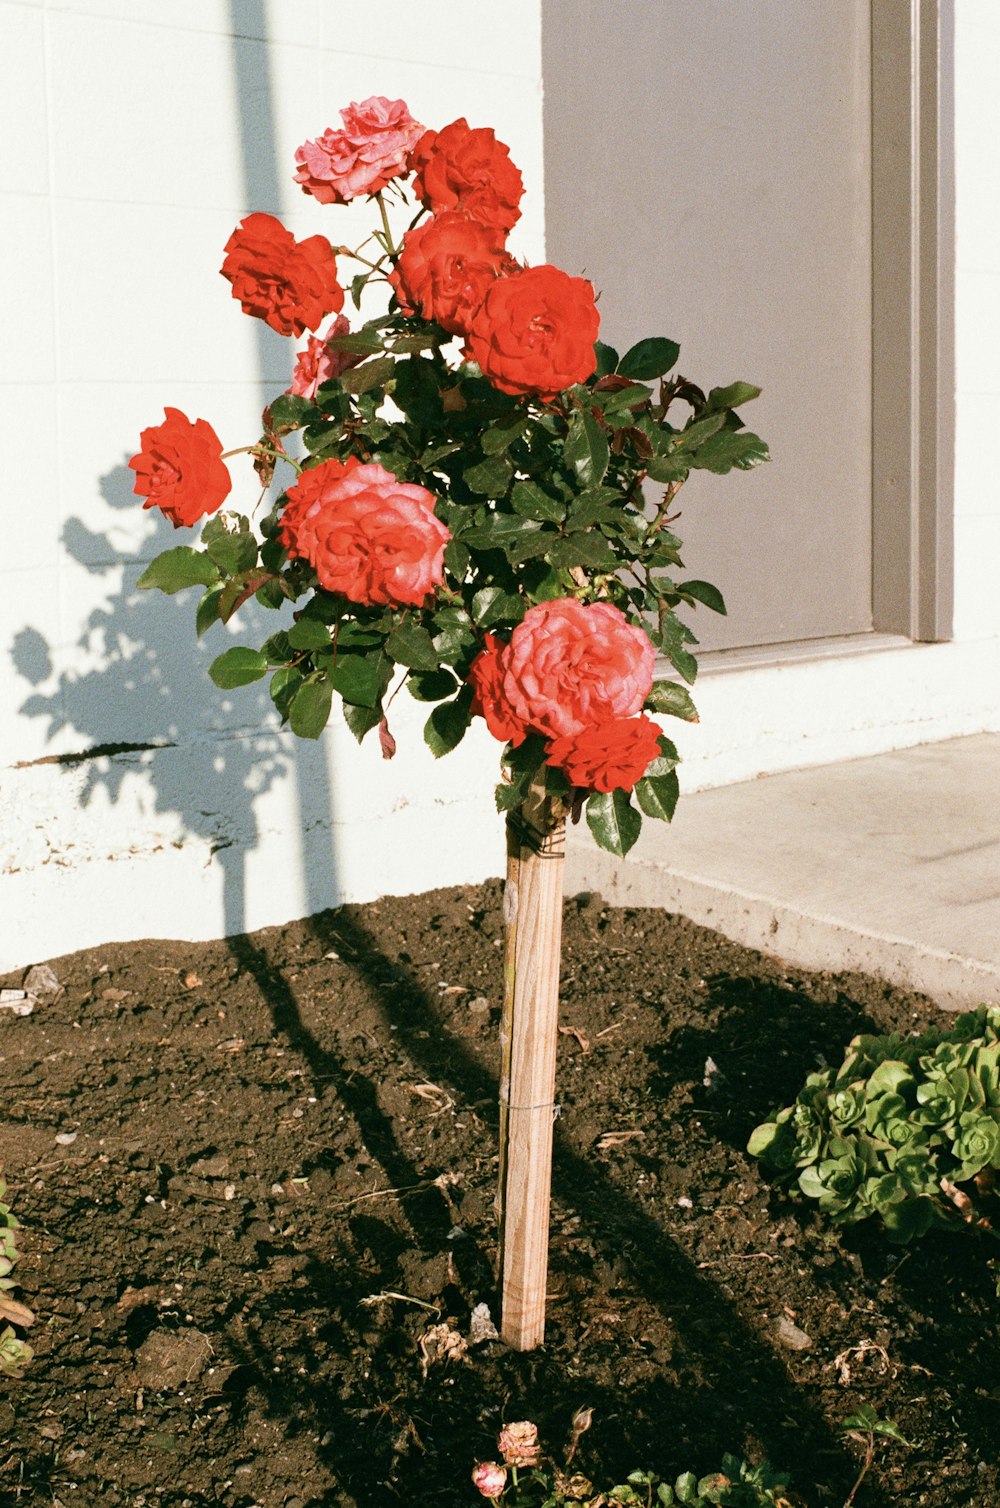 a bush of red roses growing in a garden